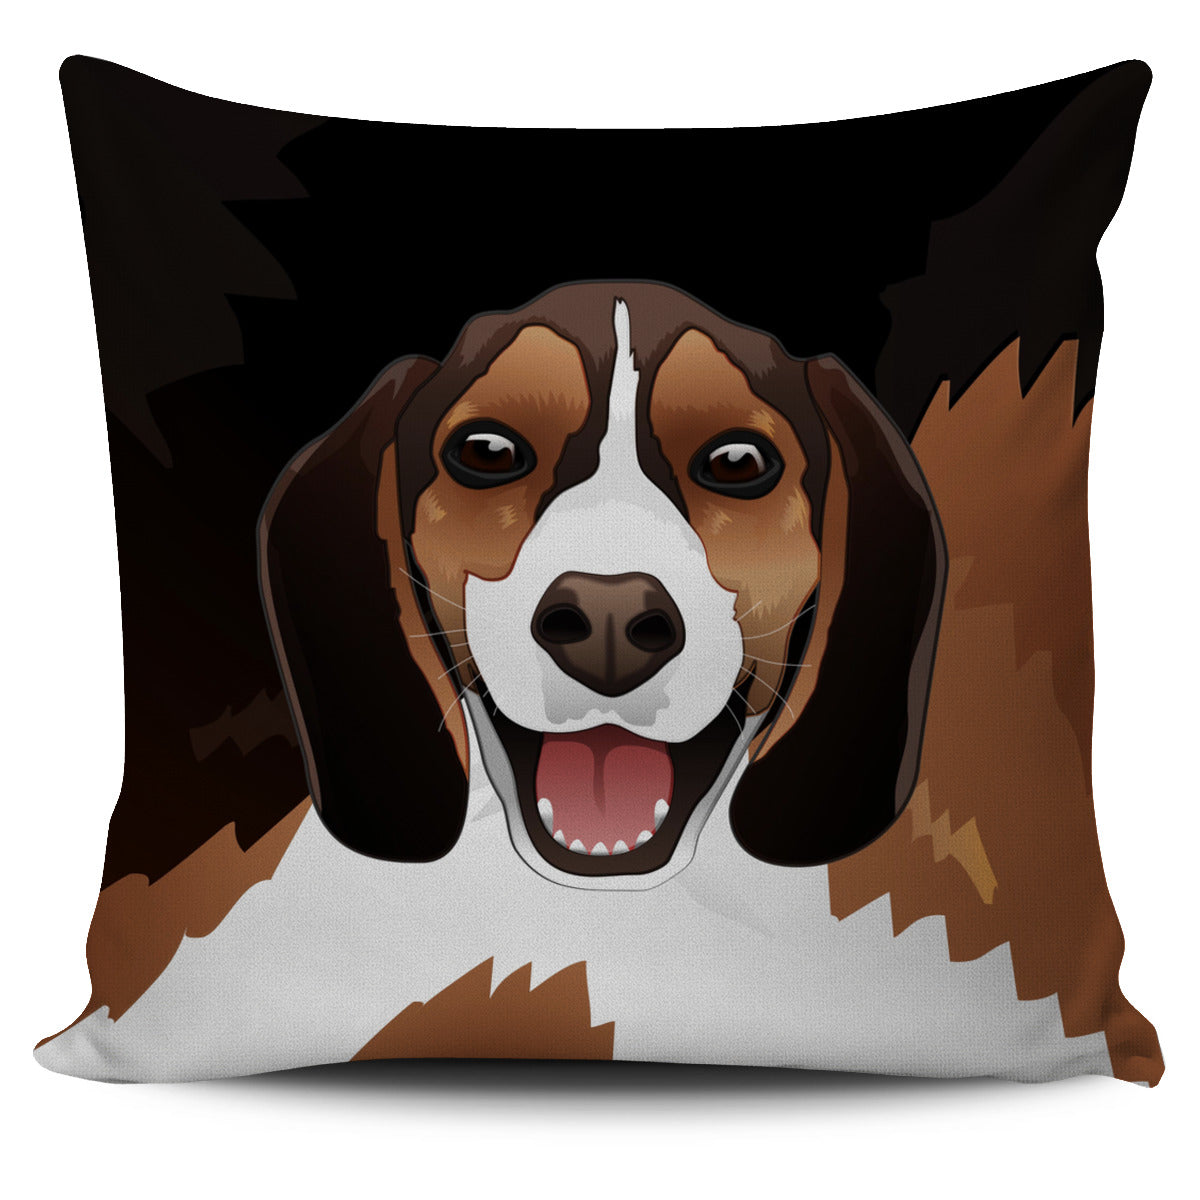 Real Beagle Dog Pillow Cover